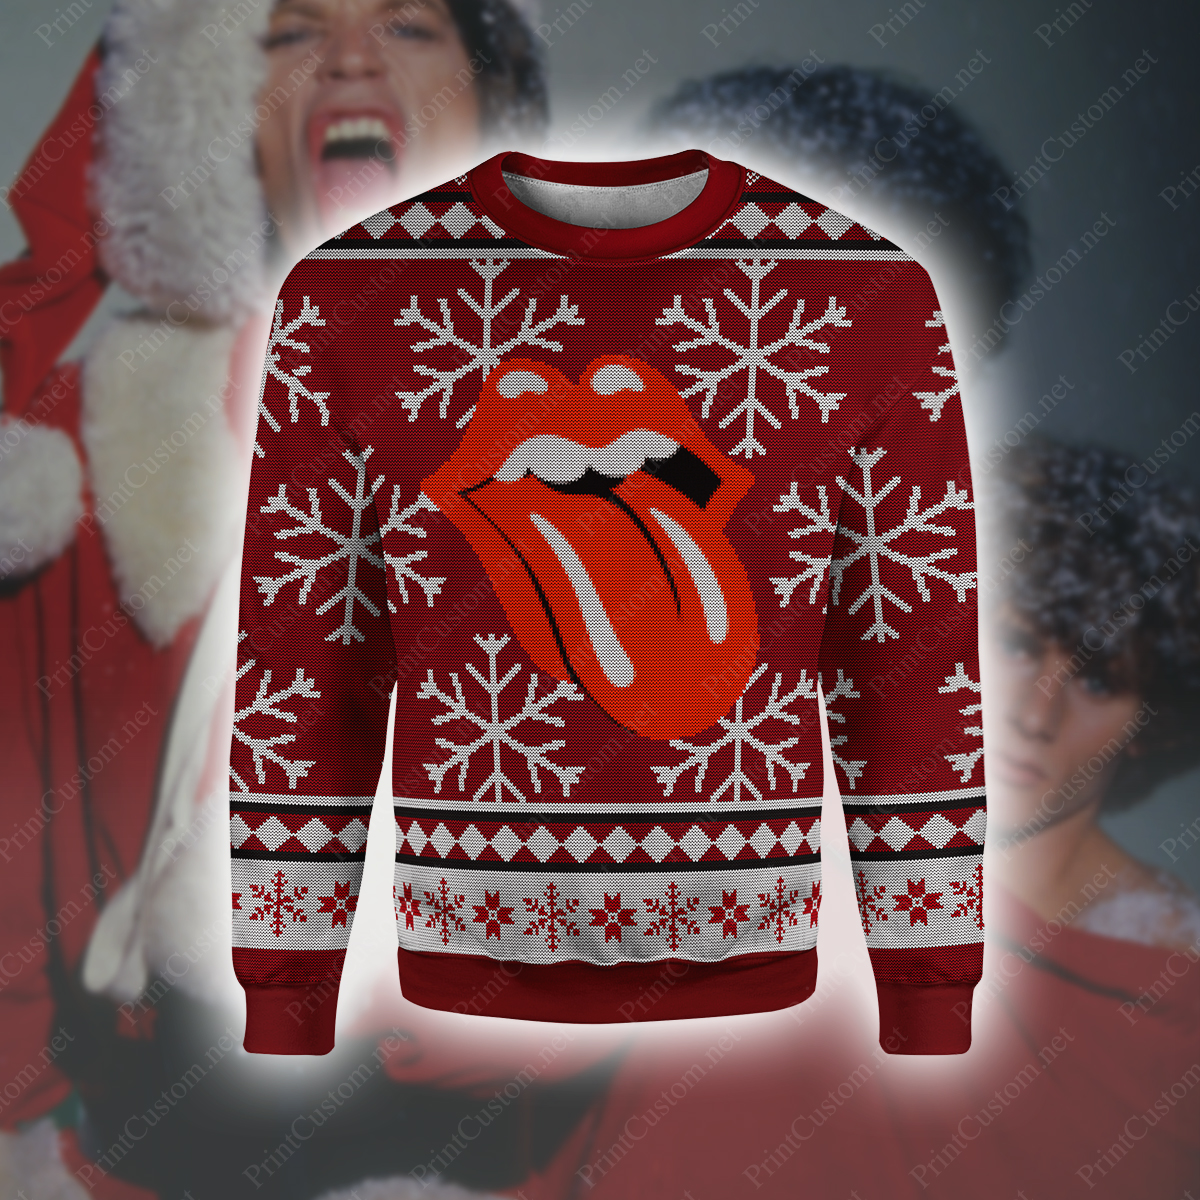 The rolling stones full printing ugly christmas sweater 1